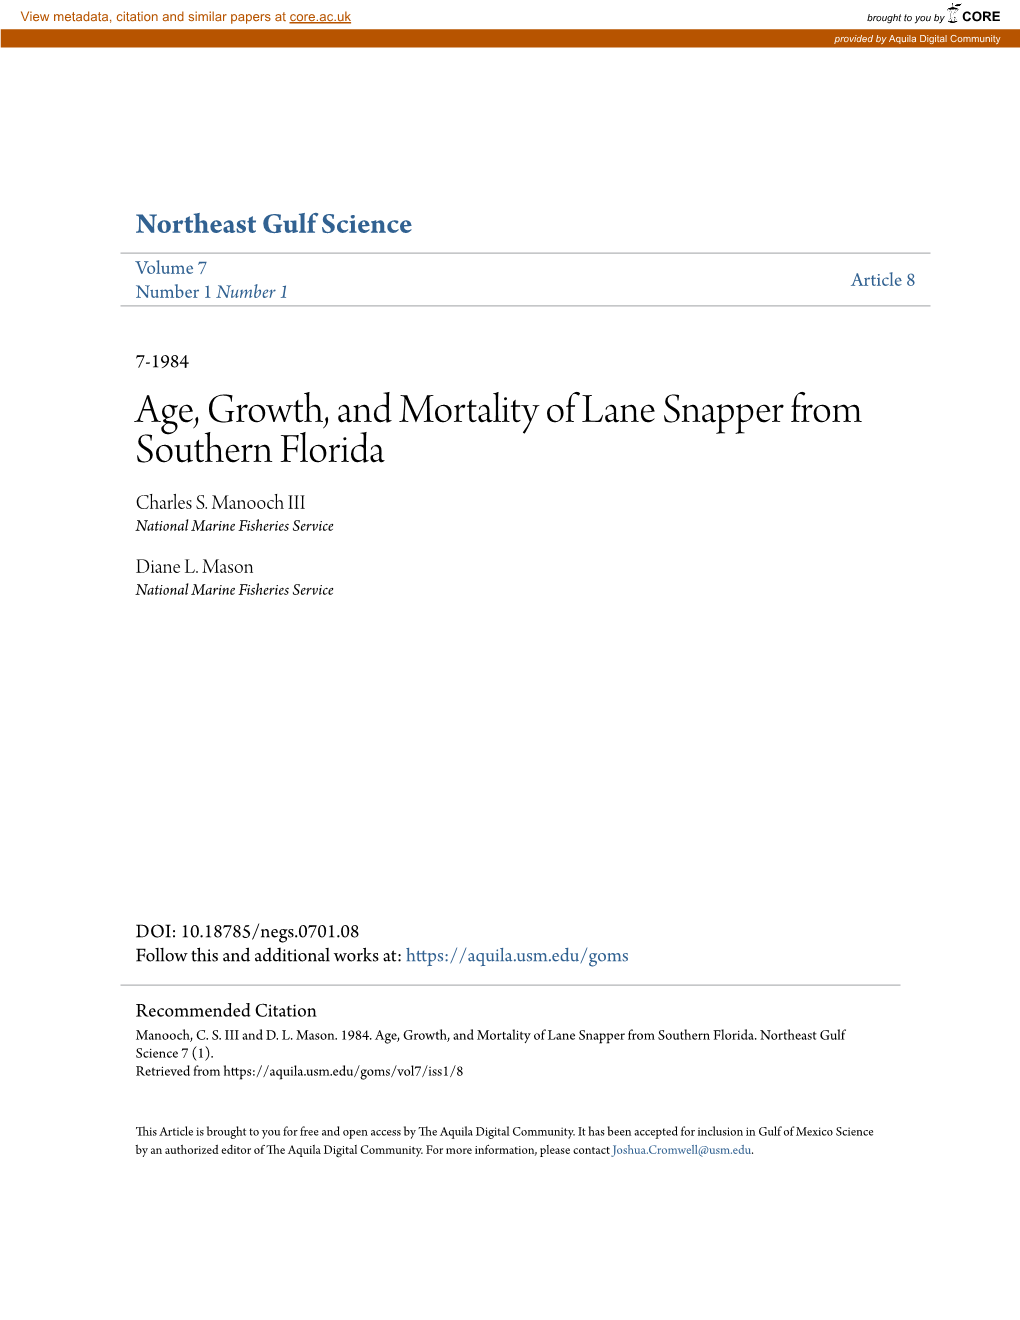 Age, Growth, and Mortality of Lane Snapper from Southern Florida Charles S